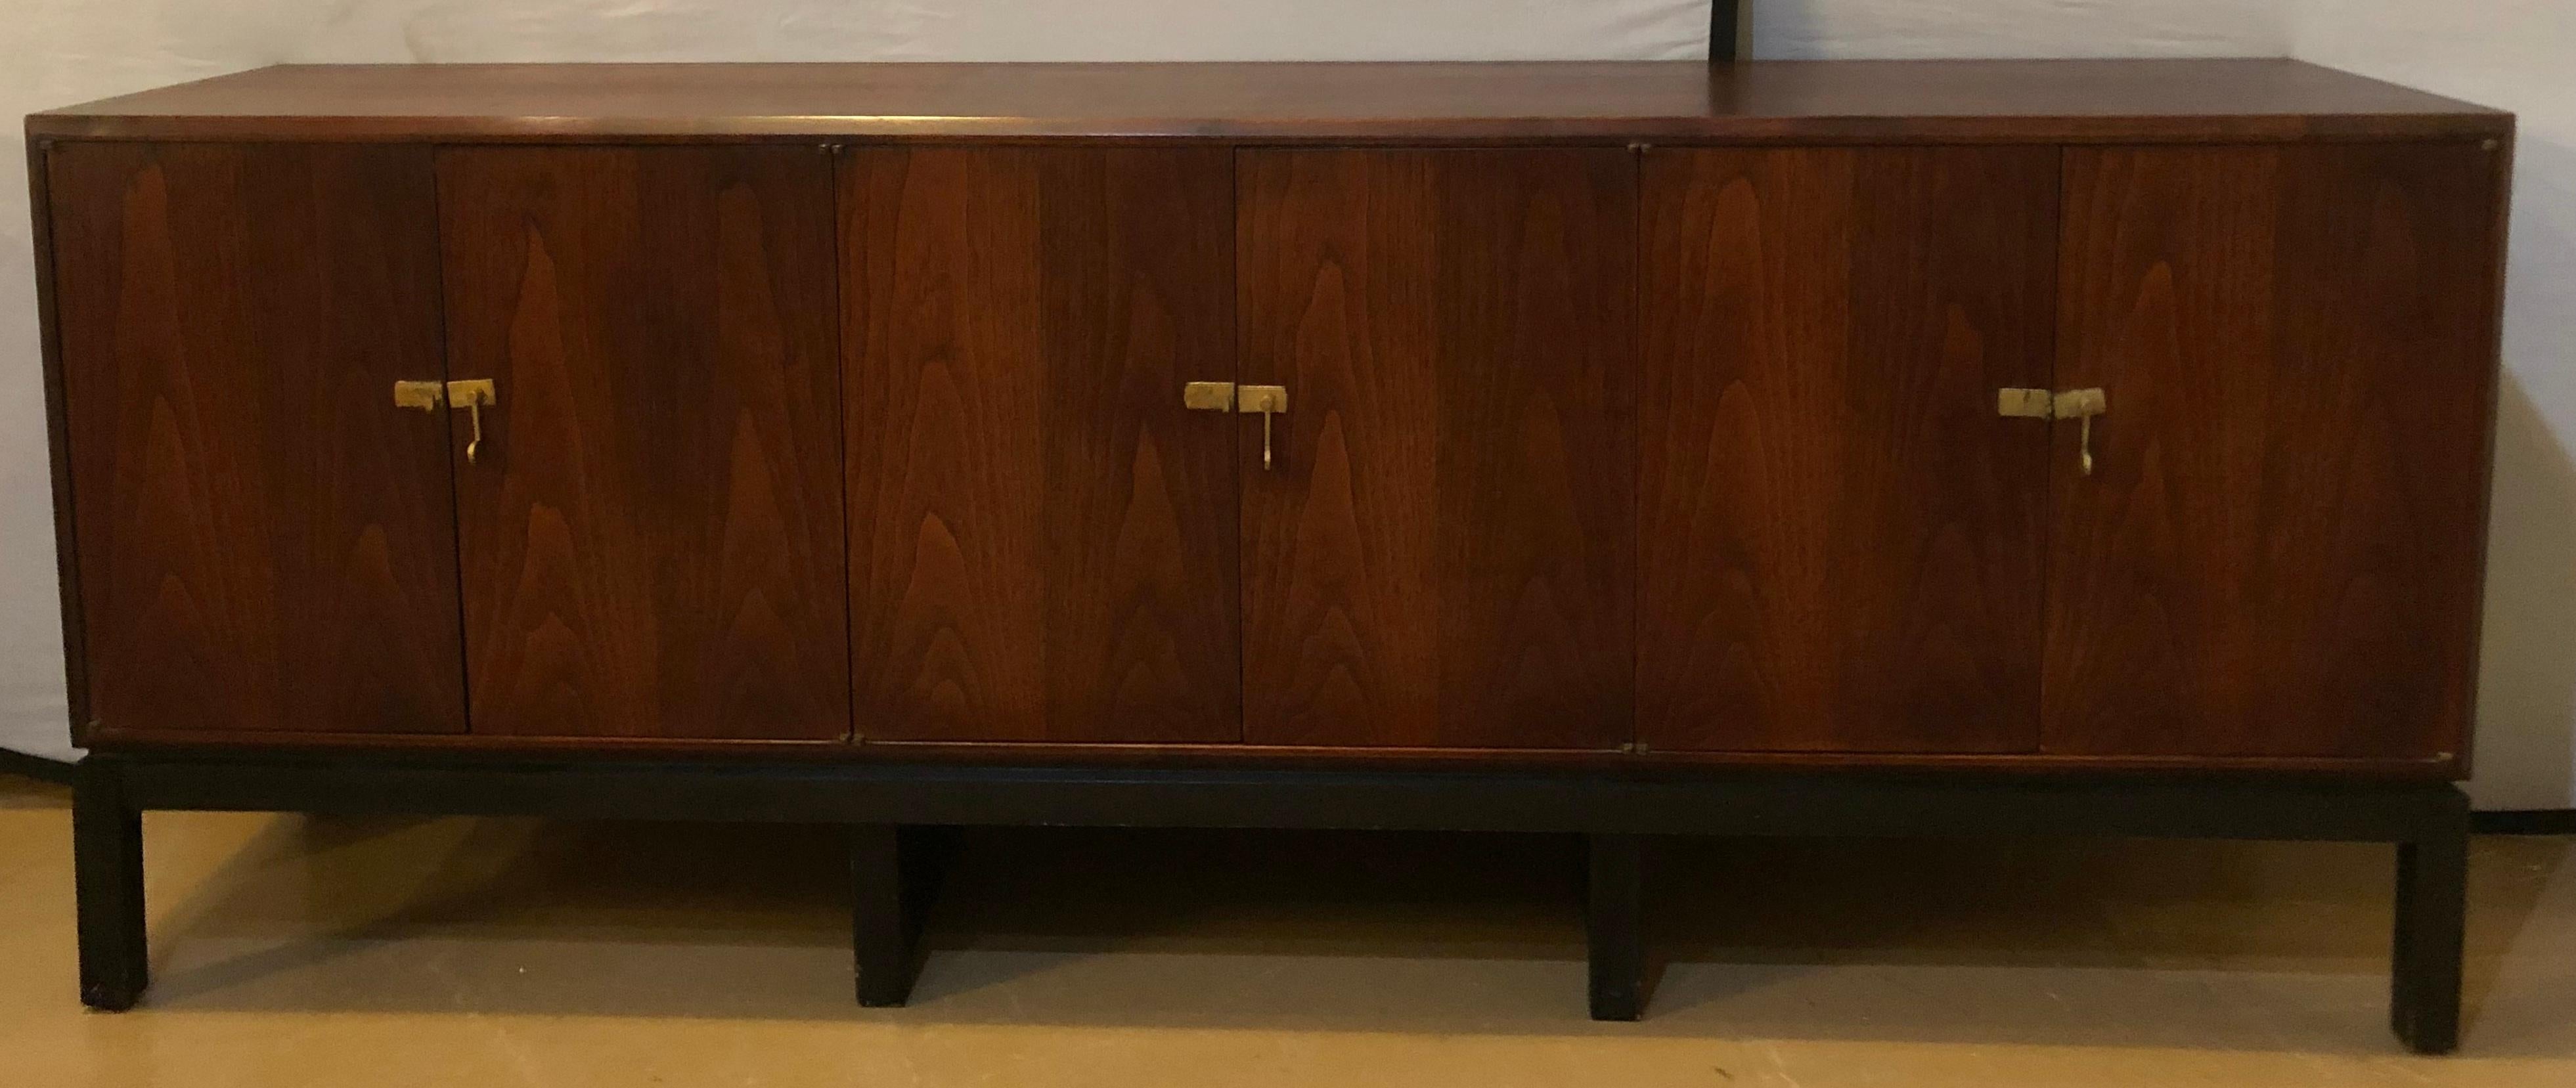 Mid-Century Modern rosewood sideboard/Console with fitted interior on ebony base. This stunning Mid-Century Modern rosewood cabinet sits on ebonized legs with a center opening having fitted drawers flanked by shelved interior side compartments. All